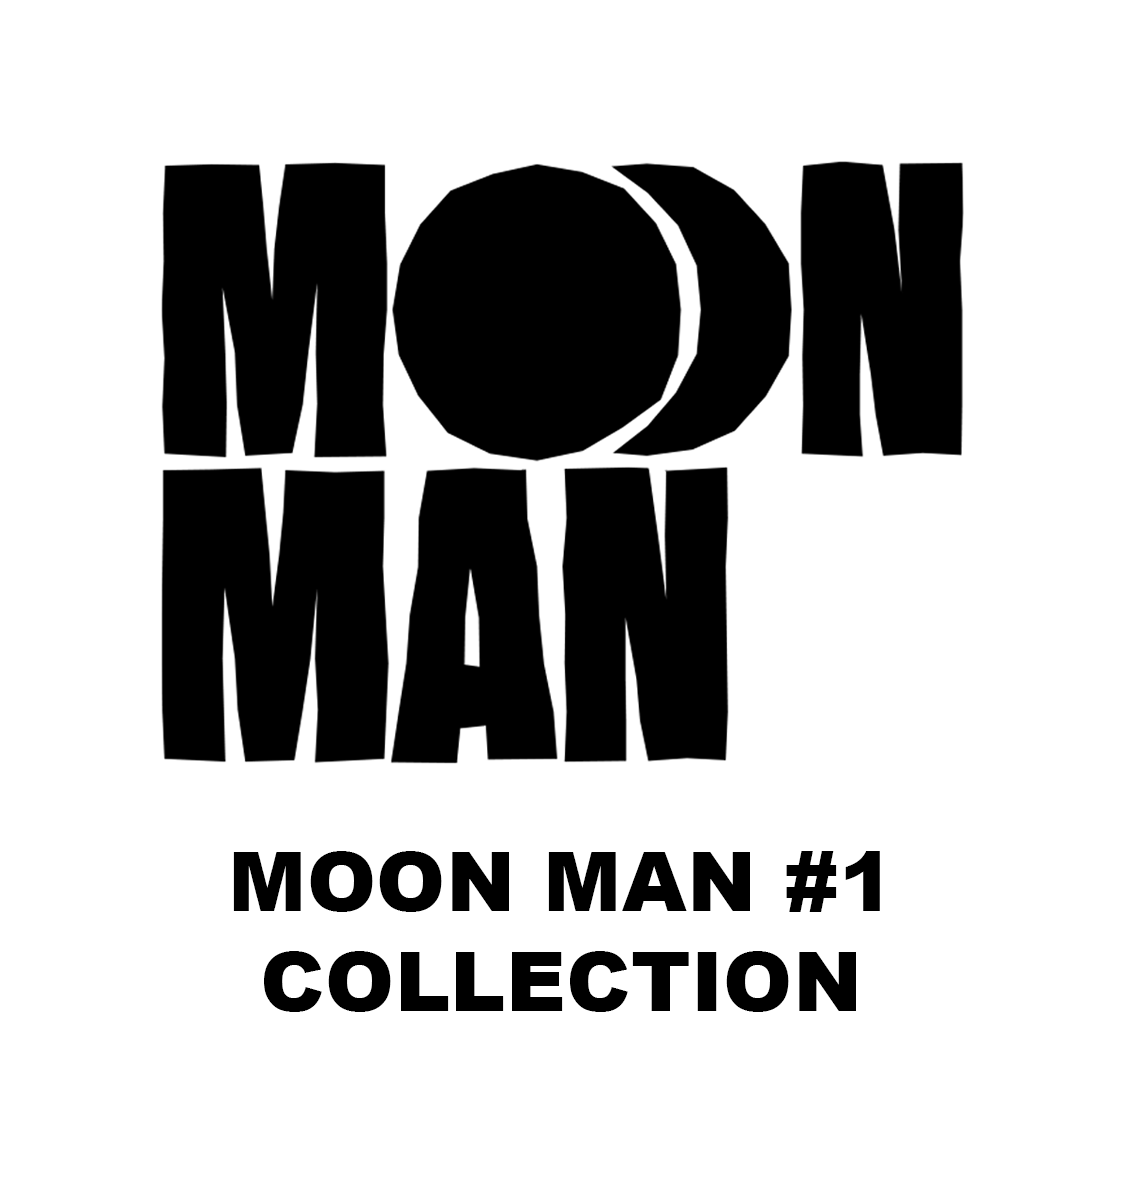 MOON MAN #1 COLLECTION